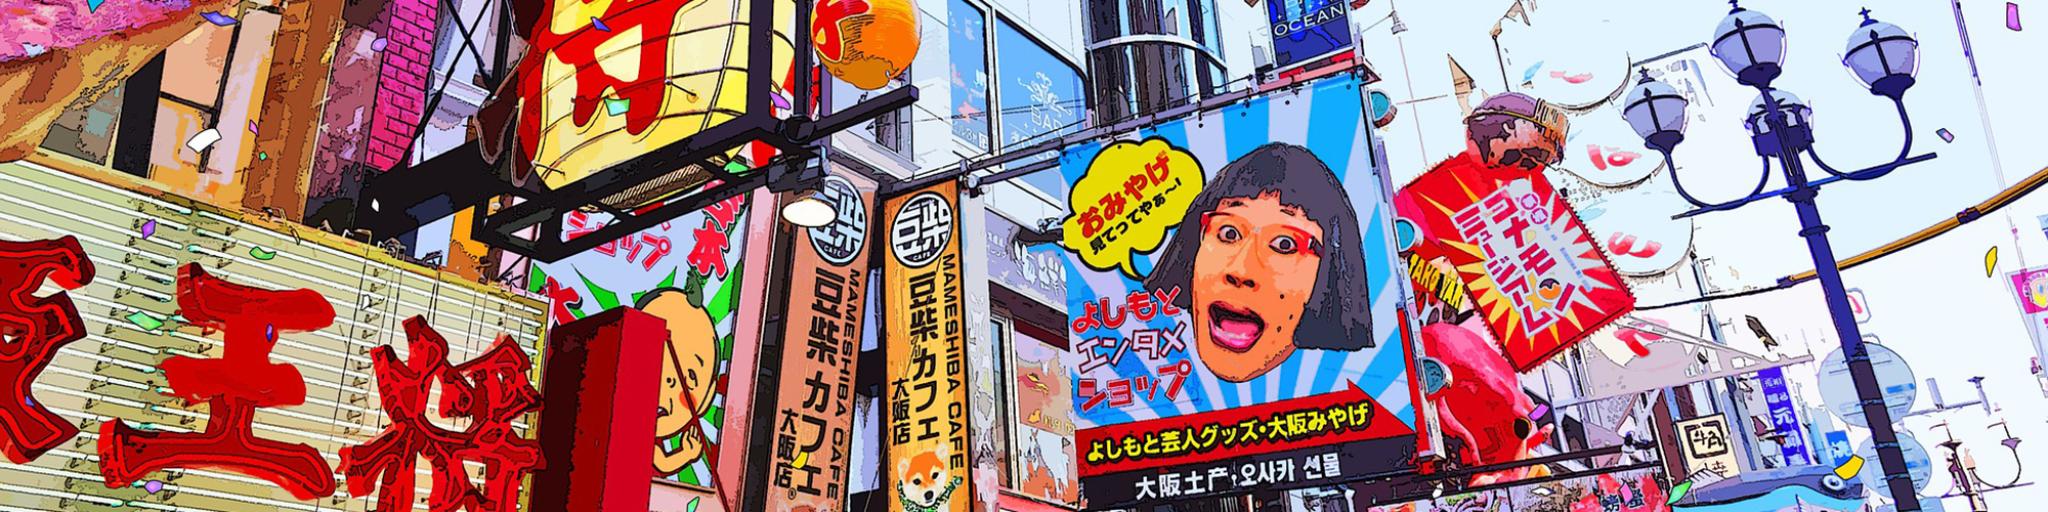 Bright neon signs in Japan